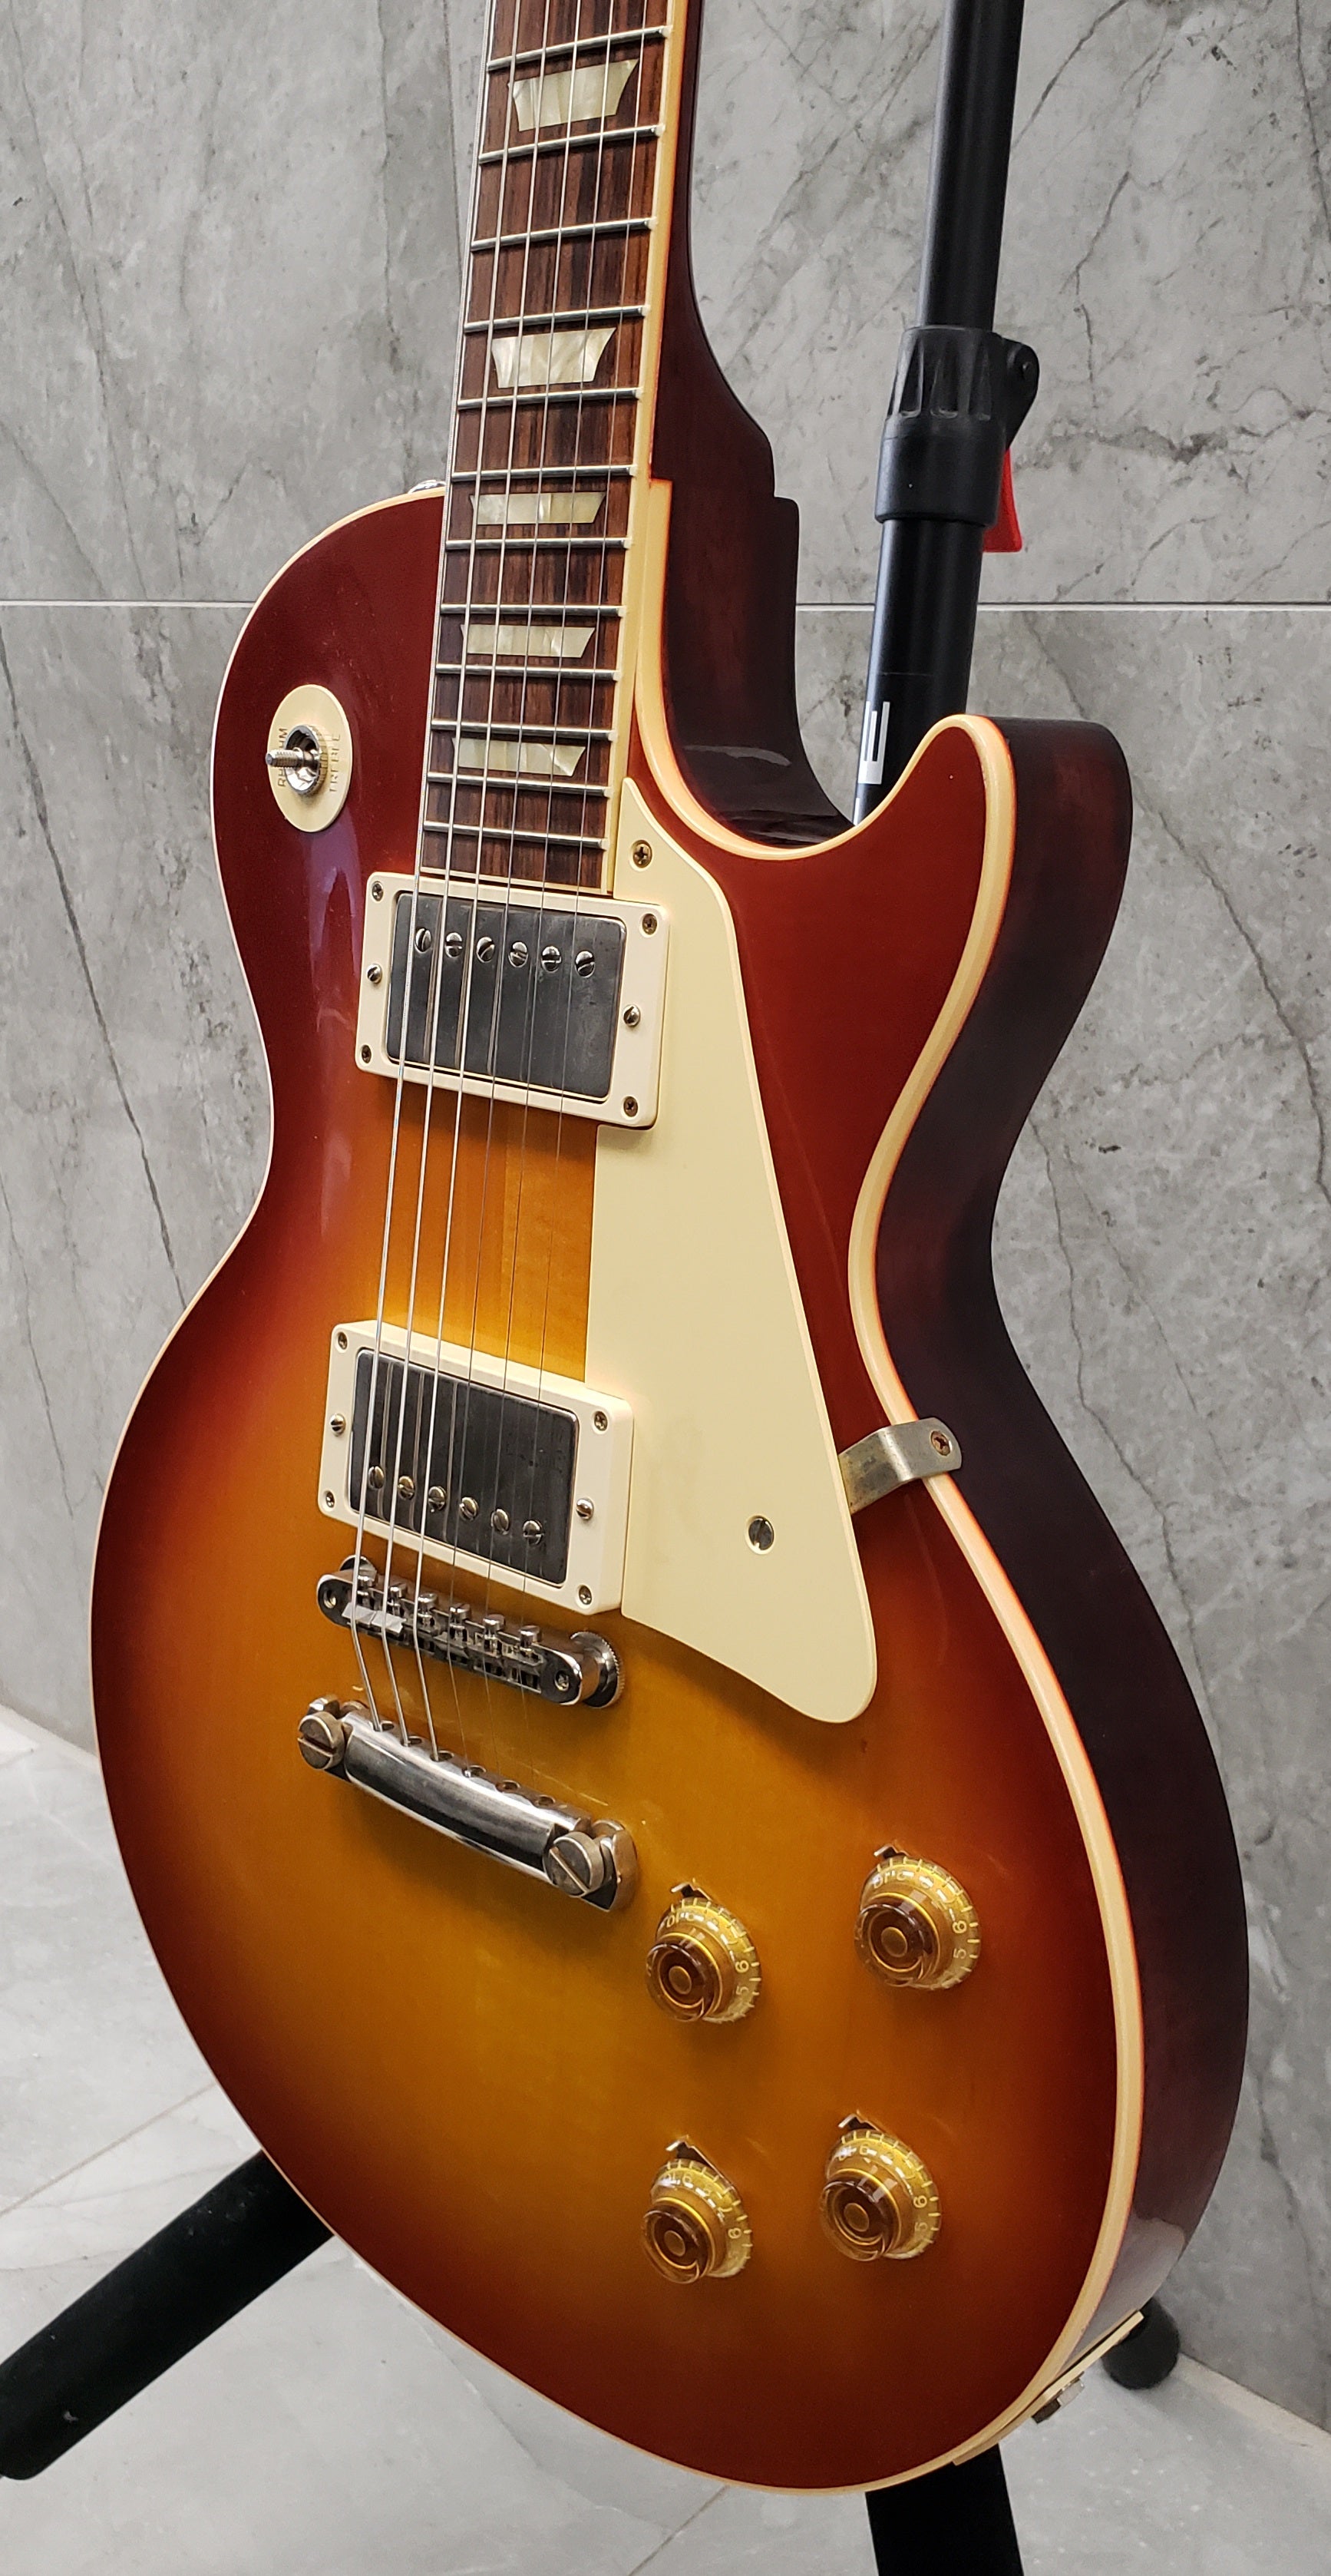 Gibson Custom Shop 1958 Les Paul Standard Reissue VOS Washed Cherry Sunburst SERIAL NUMBER 80790 8.2 LBS